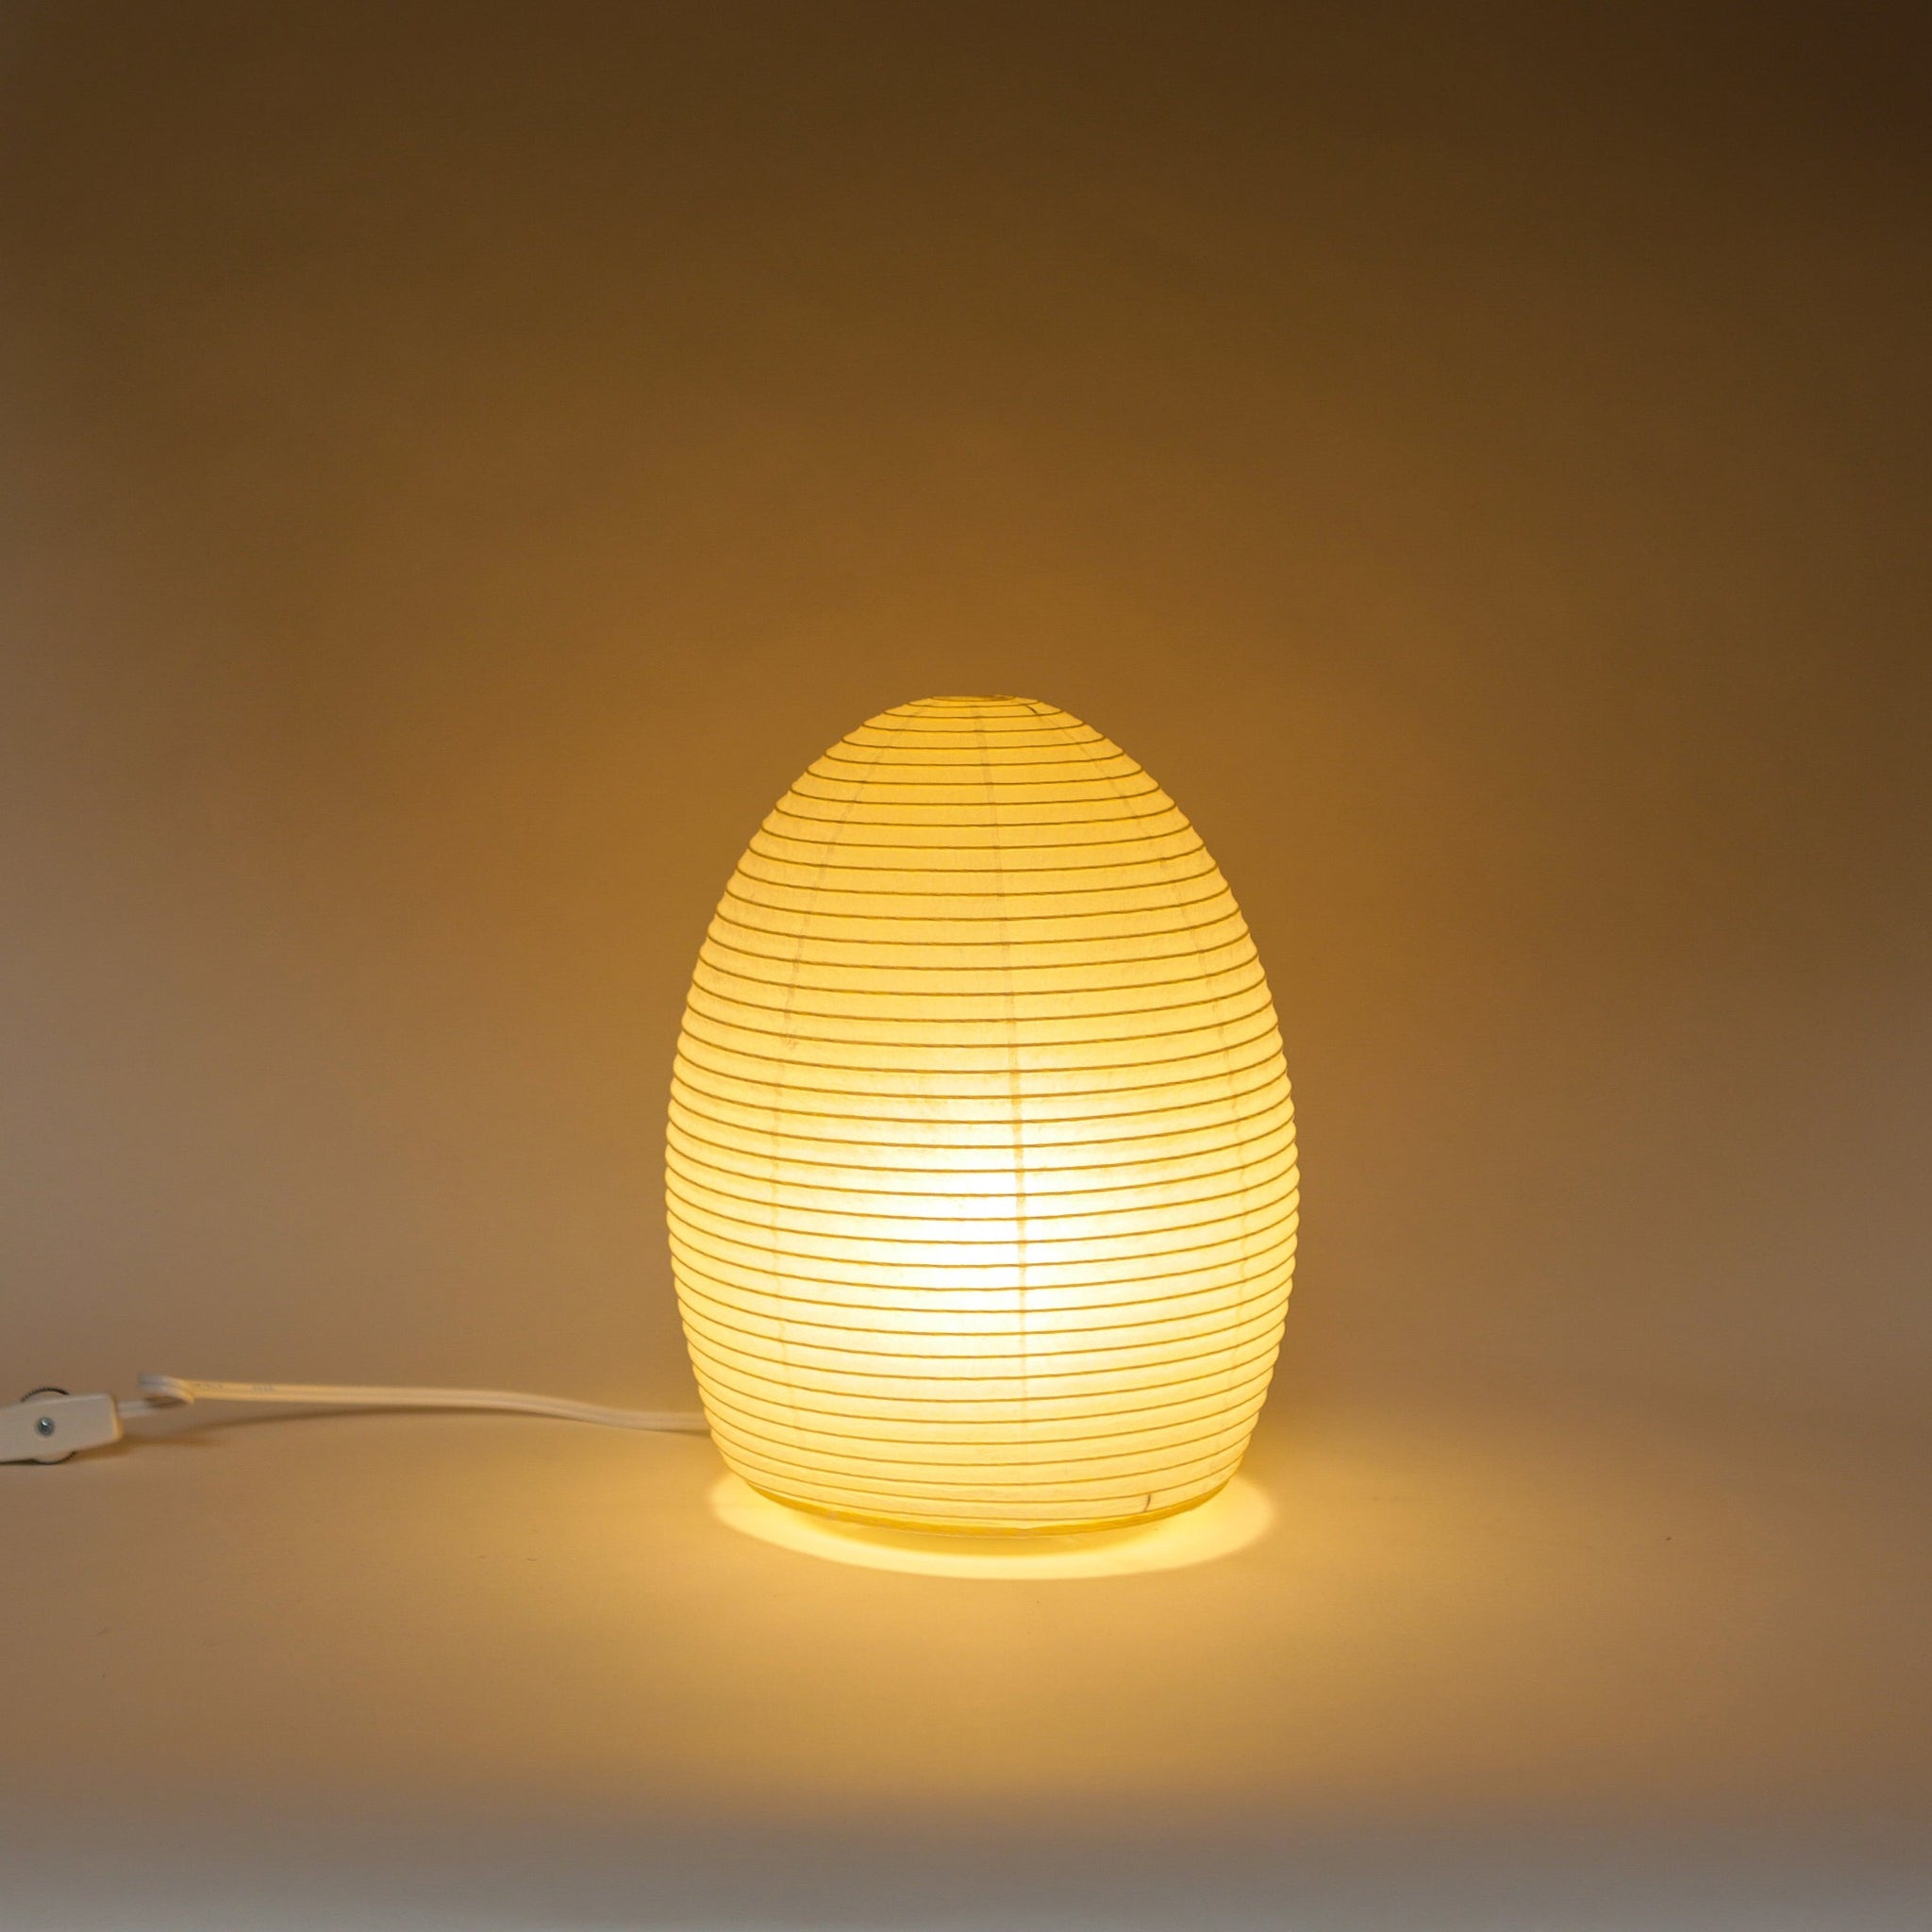 The Egg - Paper Table Lamp, No. 1